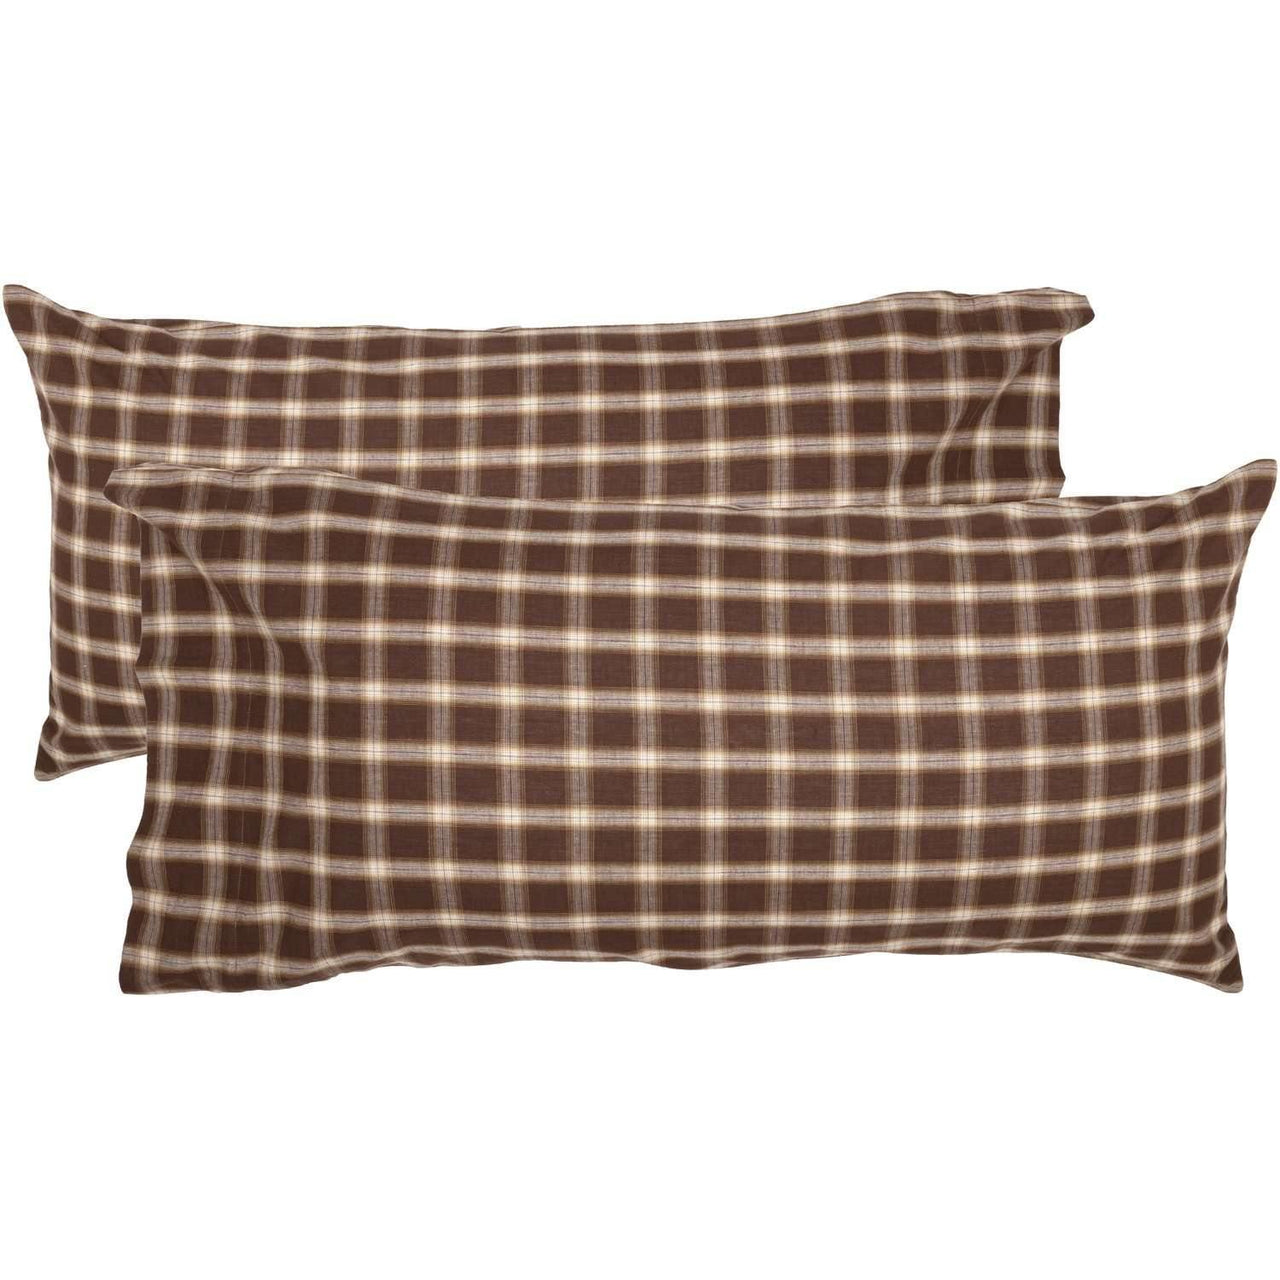 Rory King Pillow Case Set of 2 21x40 VHC Brands - The Fox Decor